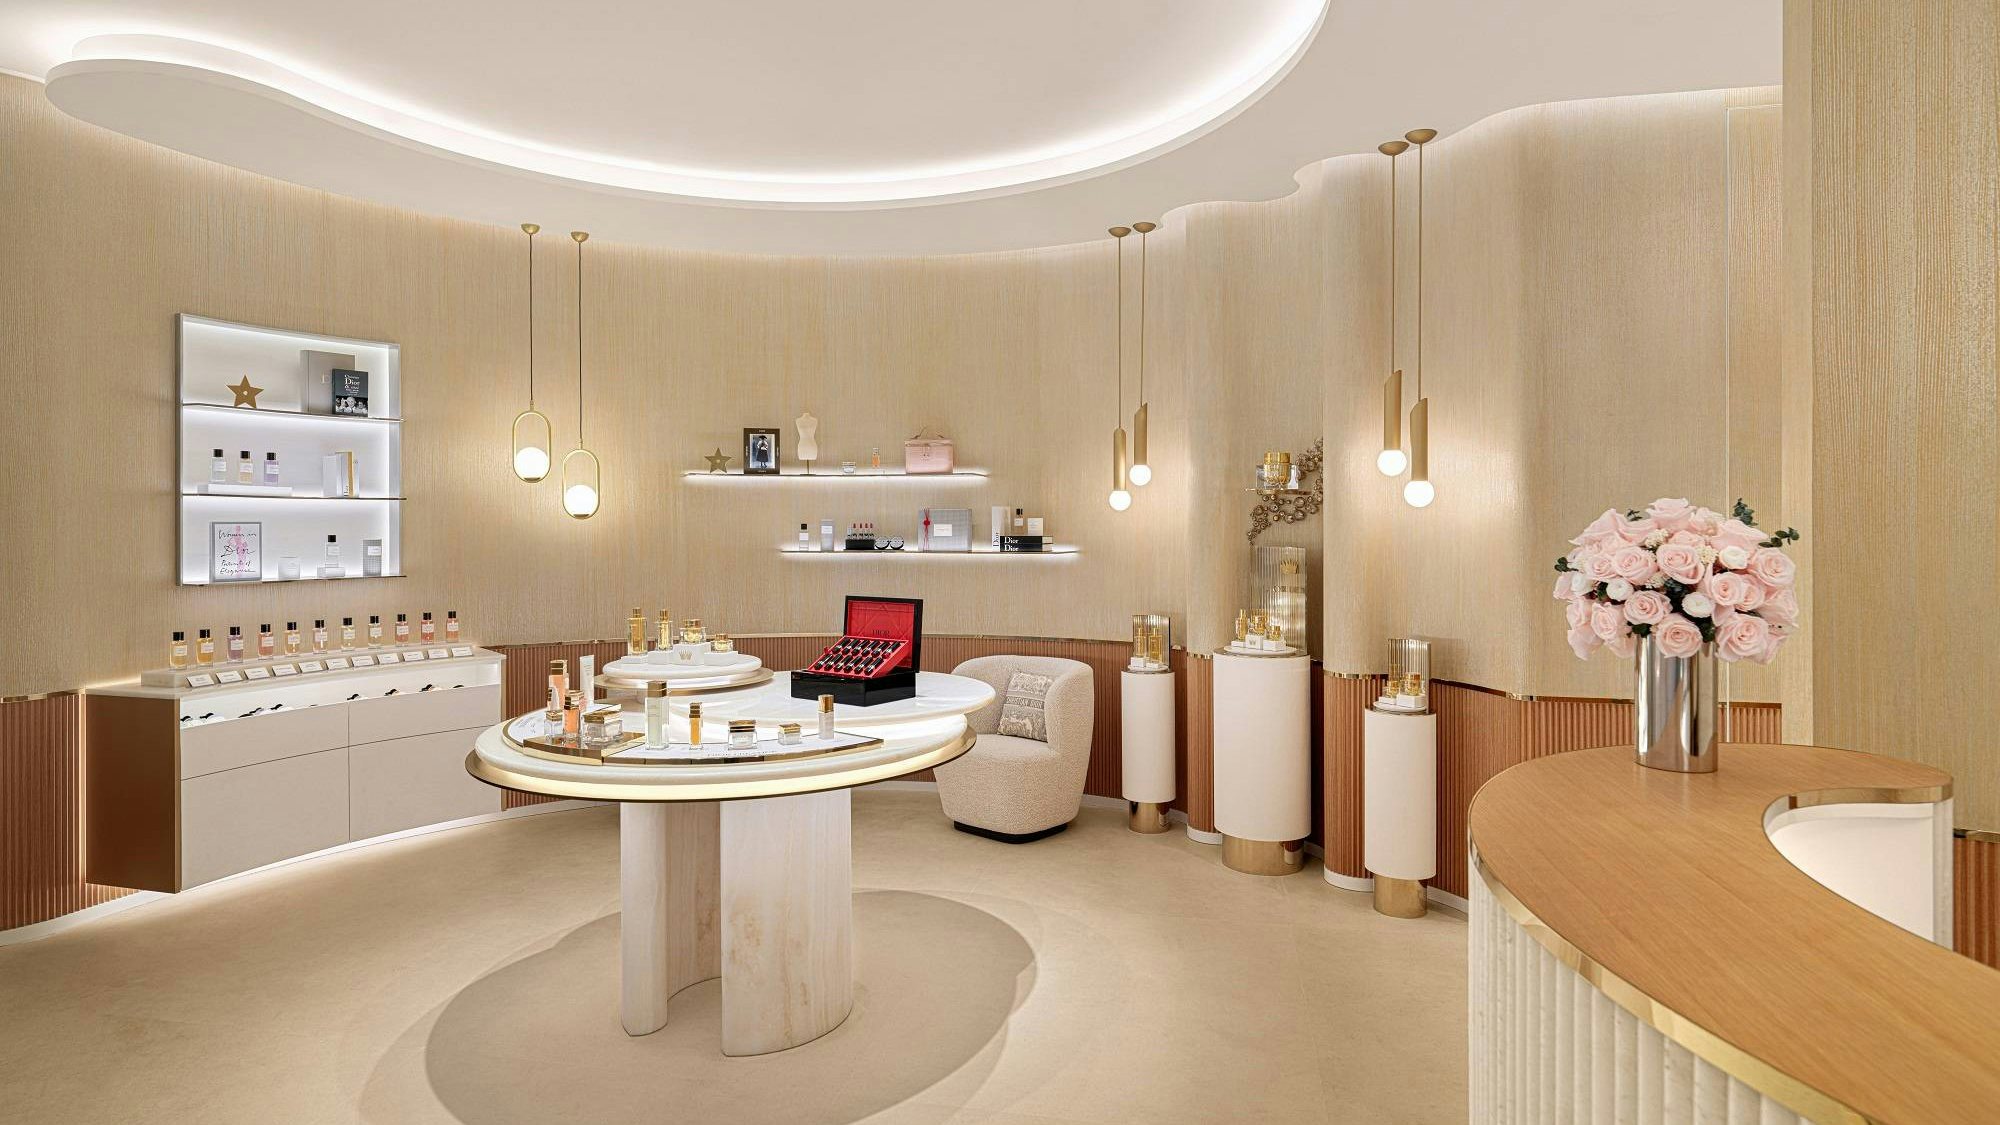 Wellness retreats and salon experiences are all the rage among China’s health-conscious Gen Z consumers. Here's how brands can tap this lucrative market. Photo: Dior